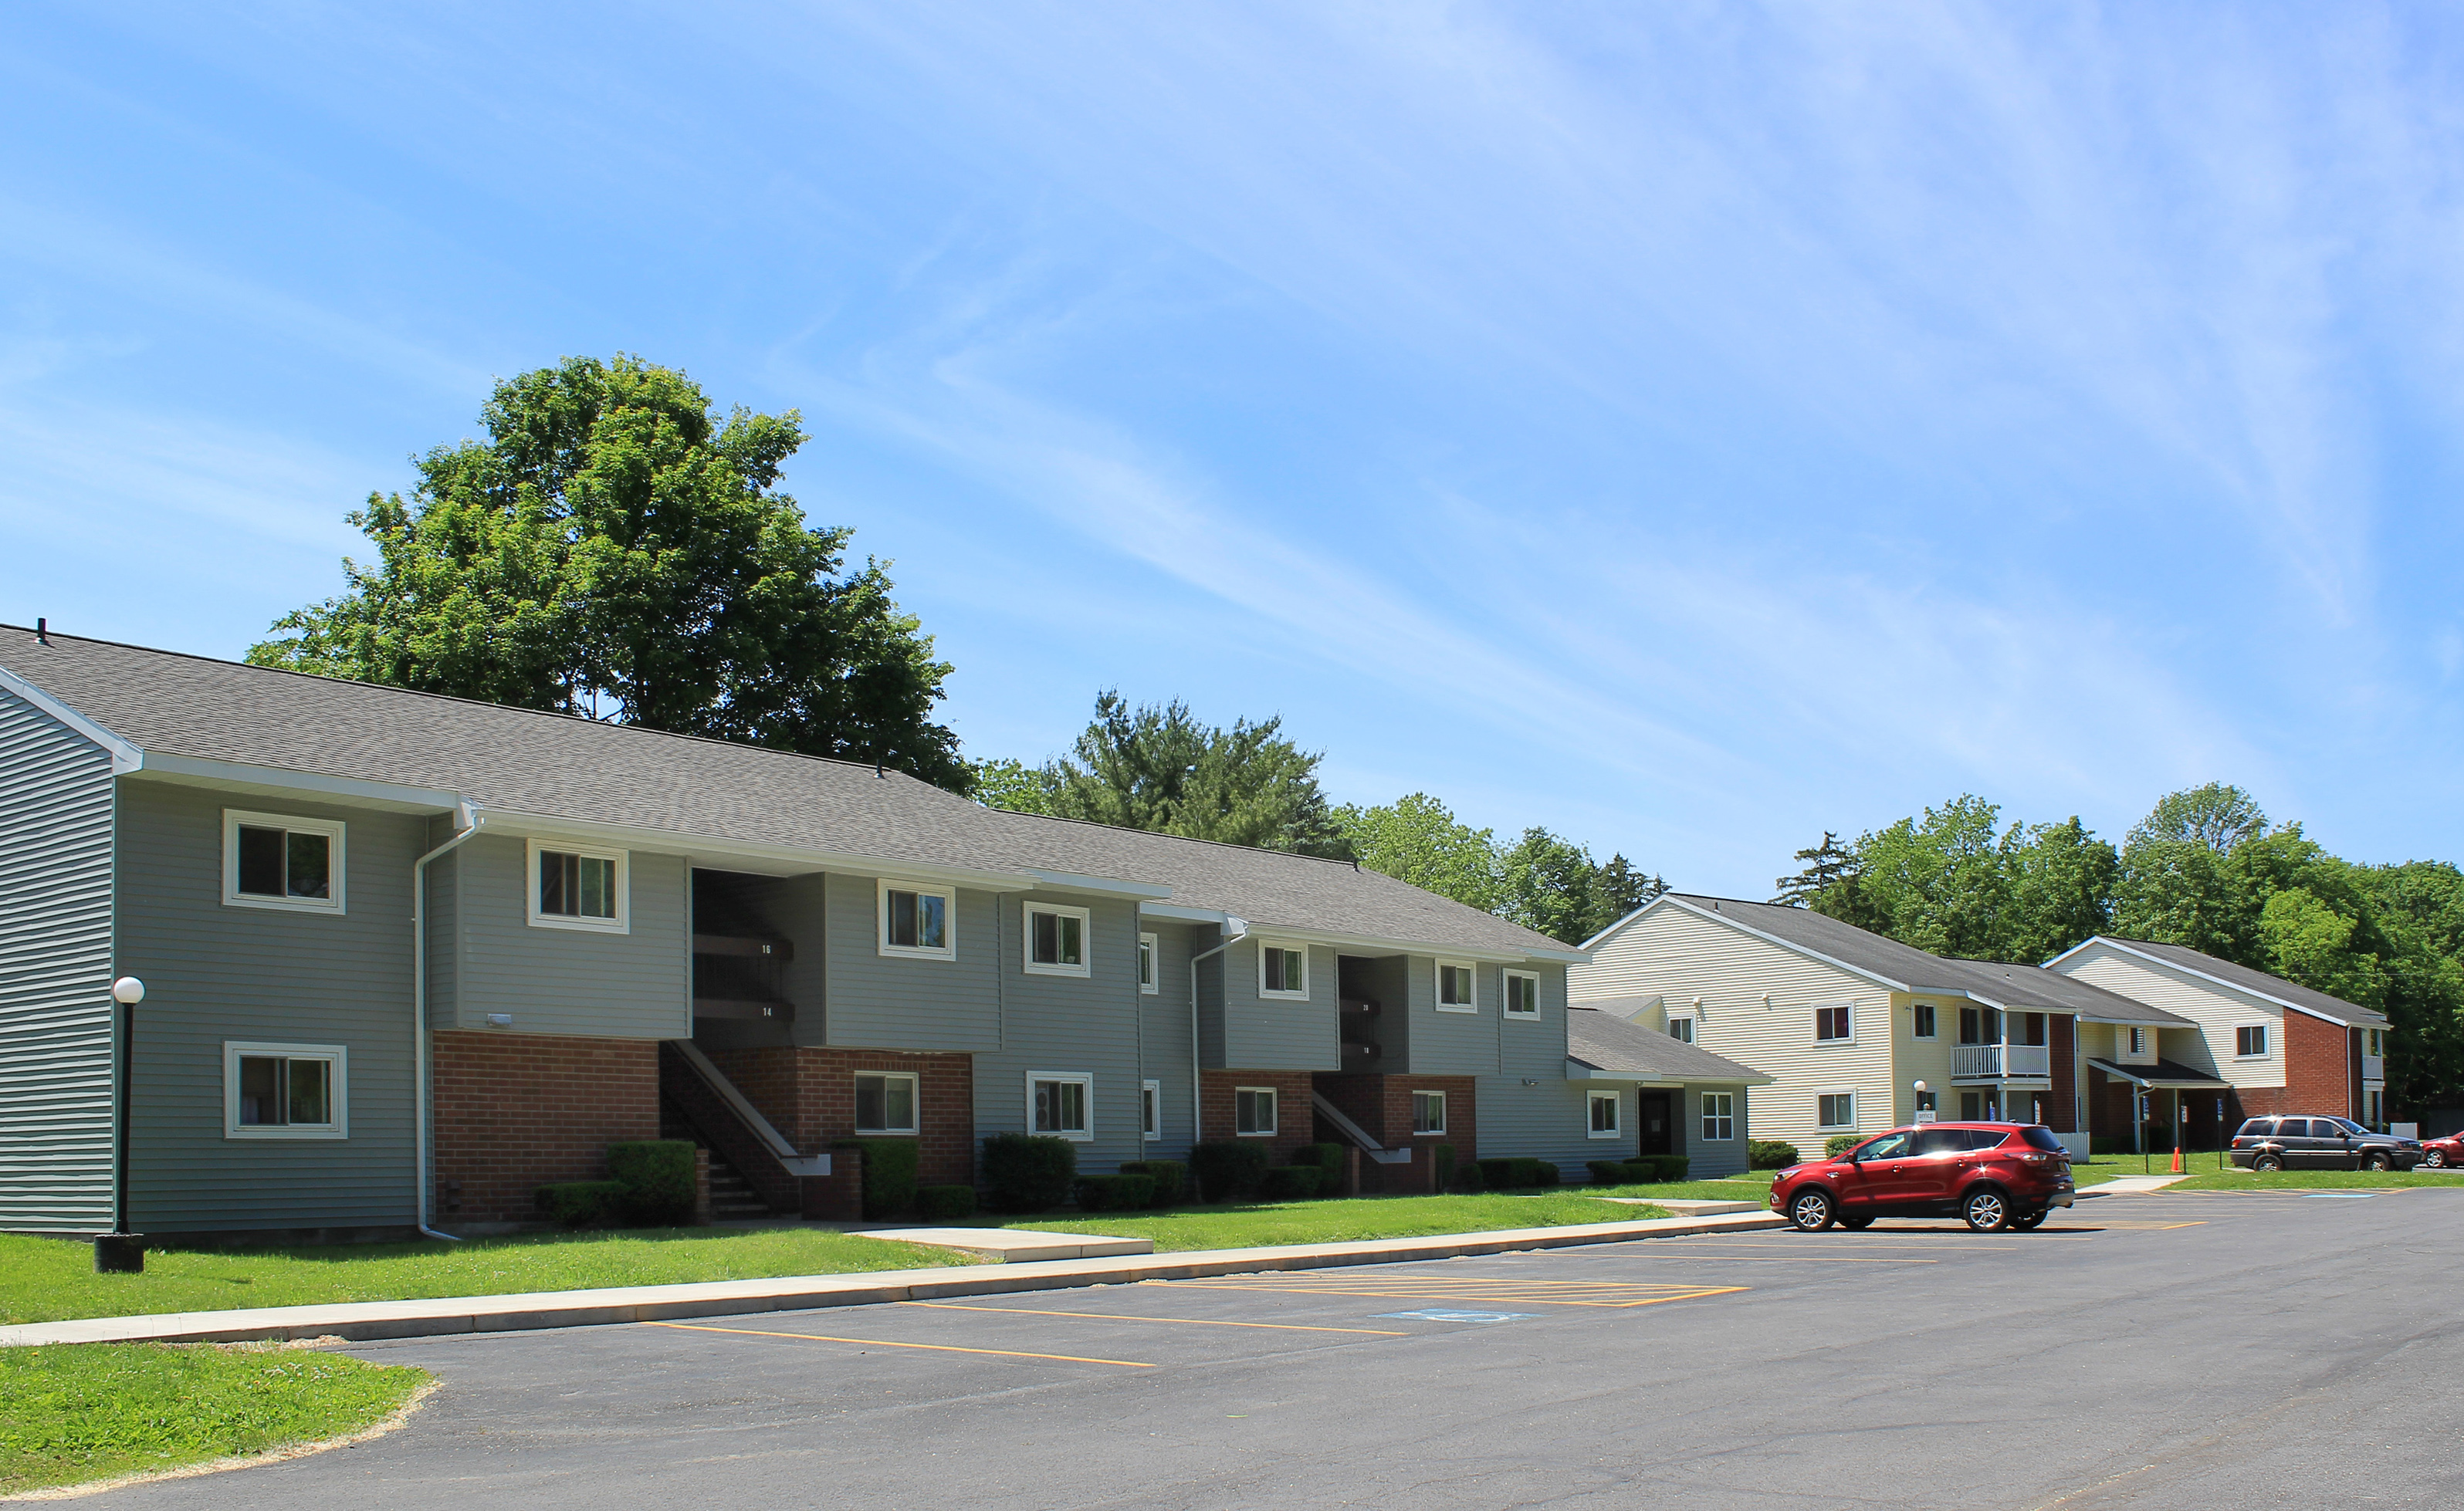 property management company client list syracuse ny housing image of village manor apartments